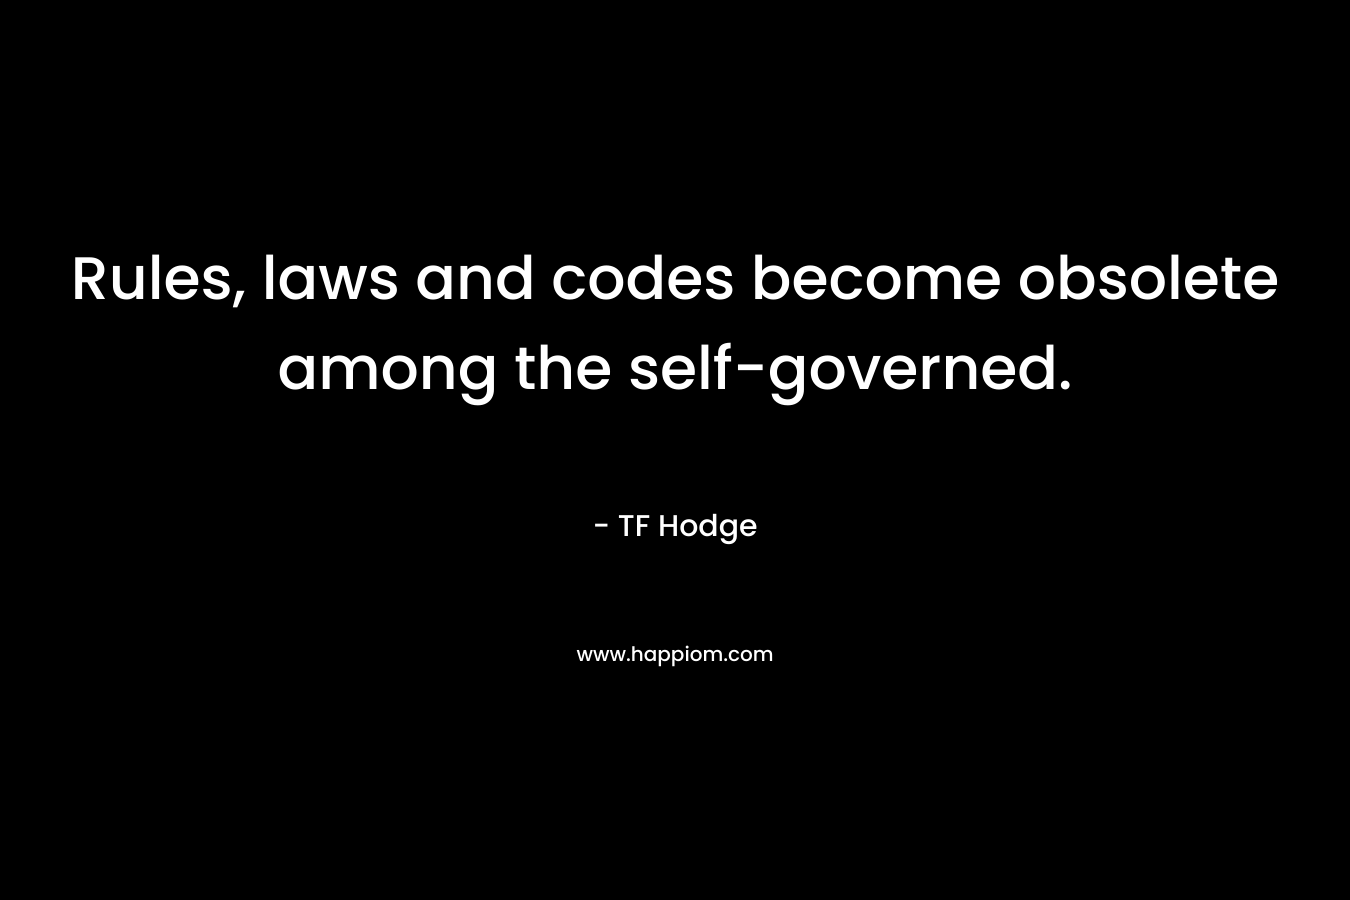 Rules, laws and codes become obsolete among the self-governed.